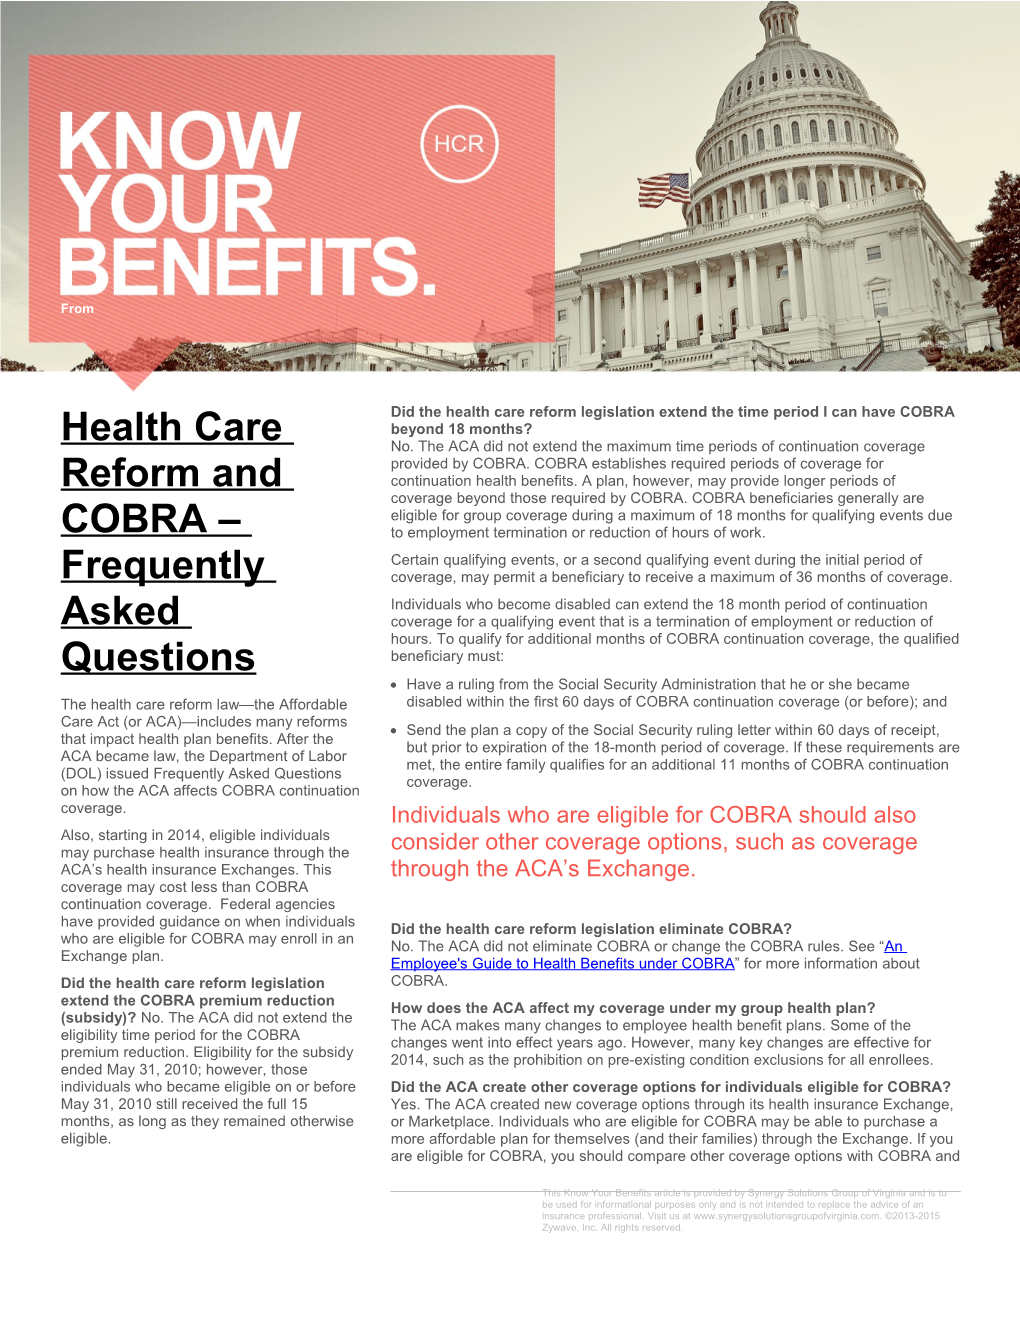 Health Care Reform and COBRA Frequently Asked Questions